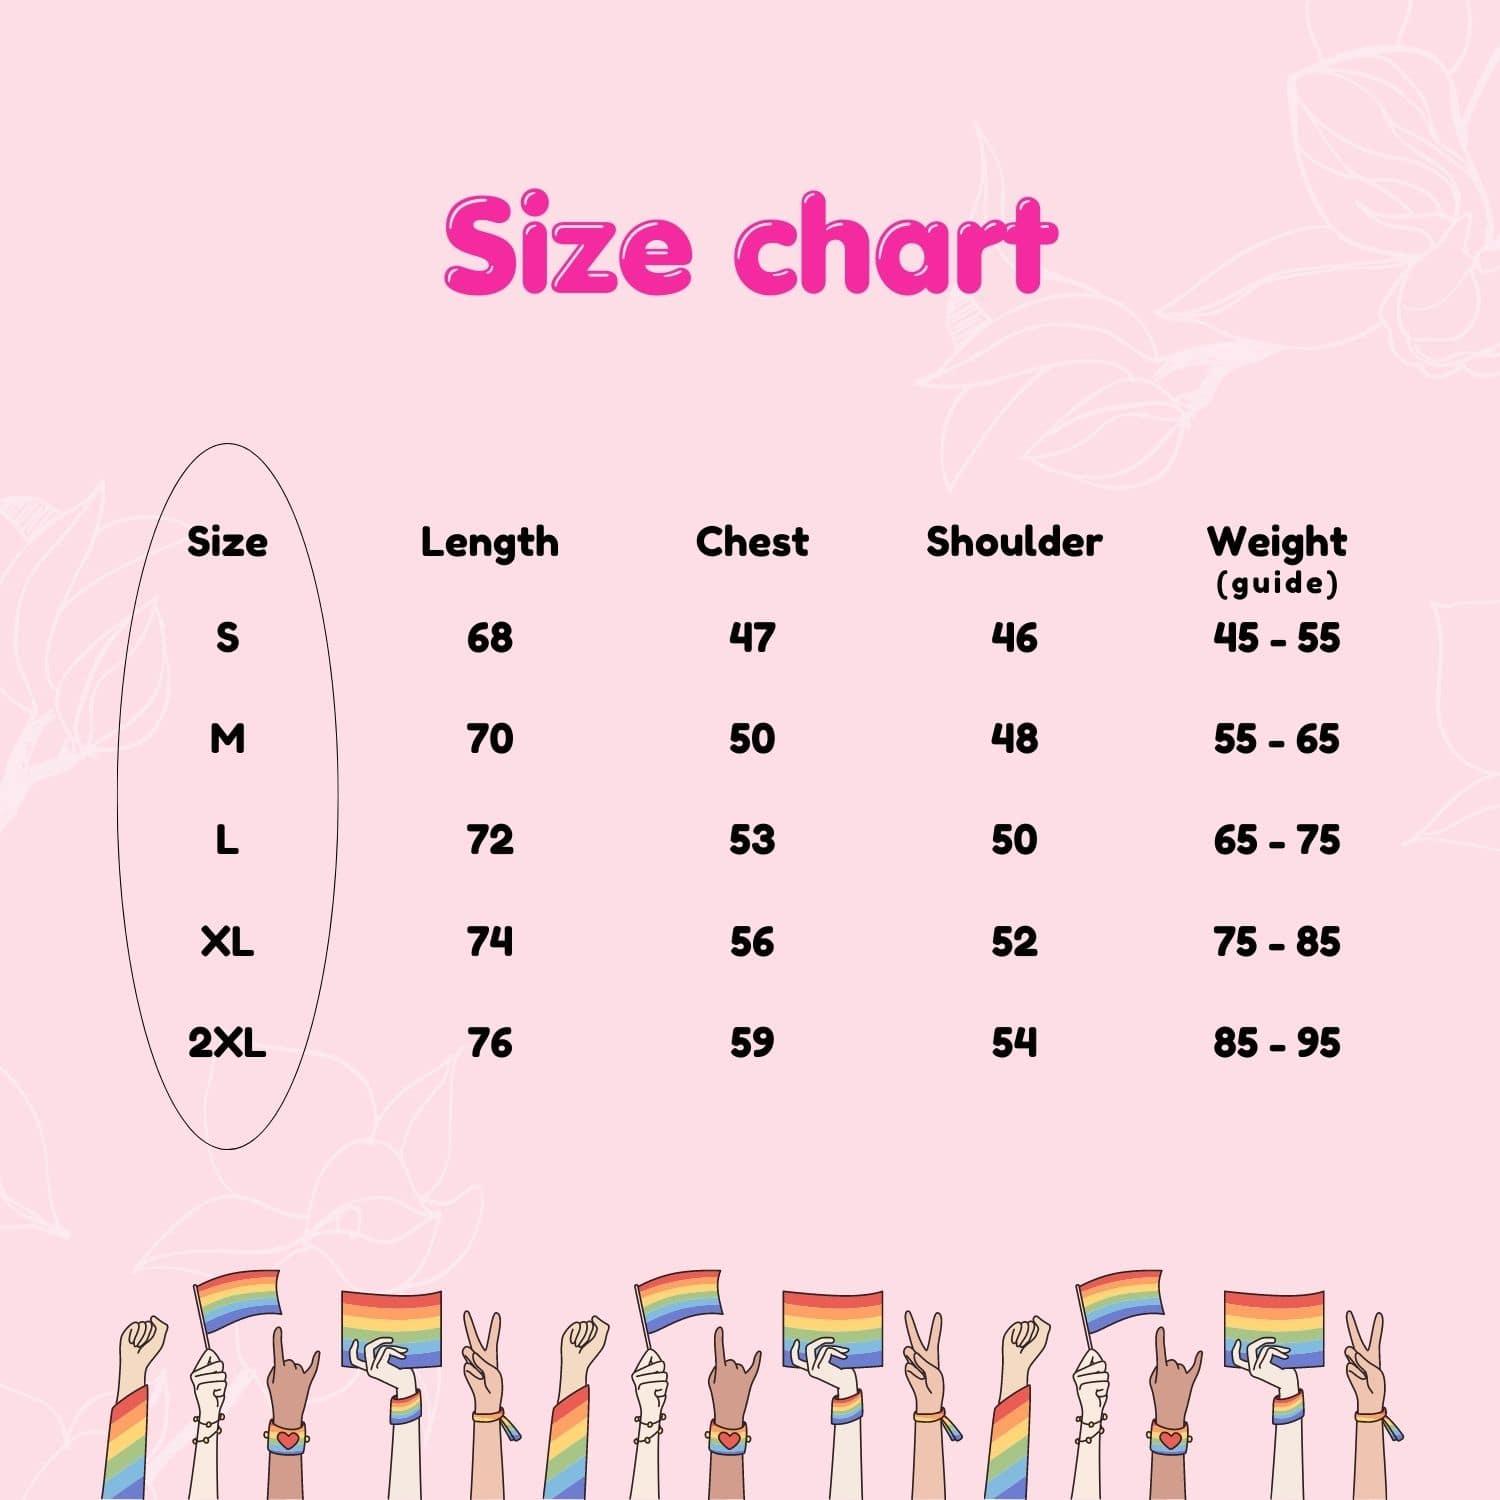 TOMSCOUT Flourish Size Chart - Accurately tailored for the LGBT Pride Kits in Singapore, this comprehensive size chart ensures a perfect fit for your sustainable pride apparel and accessories.